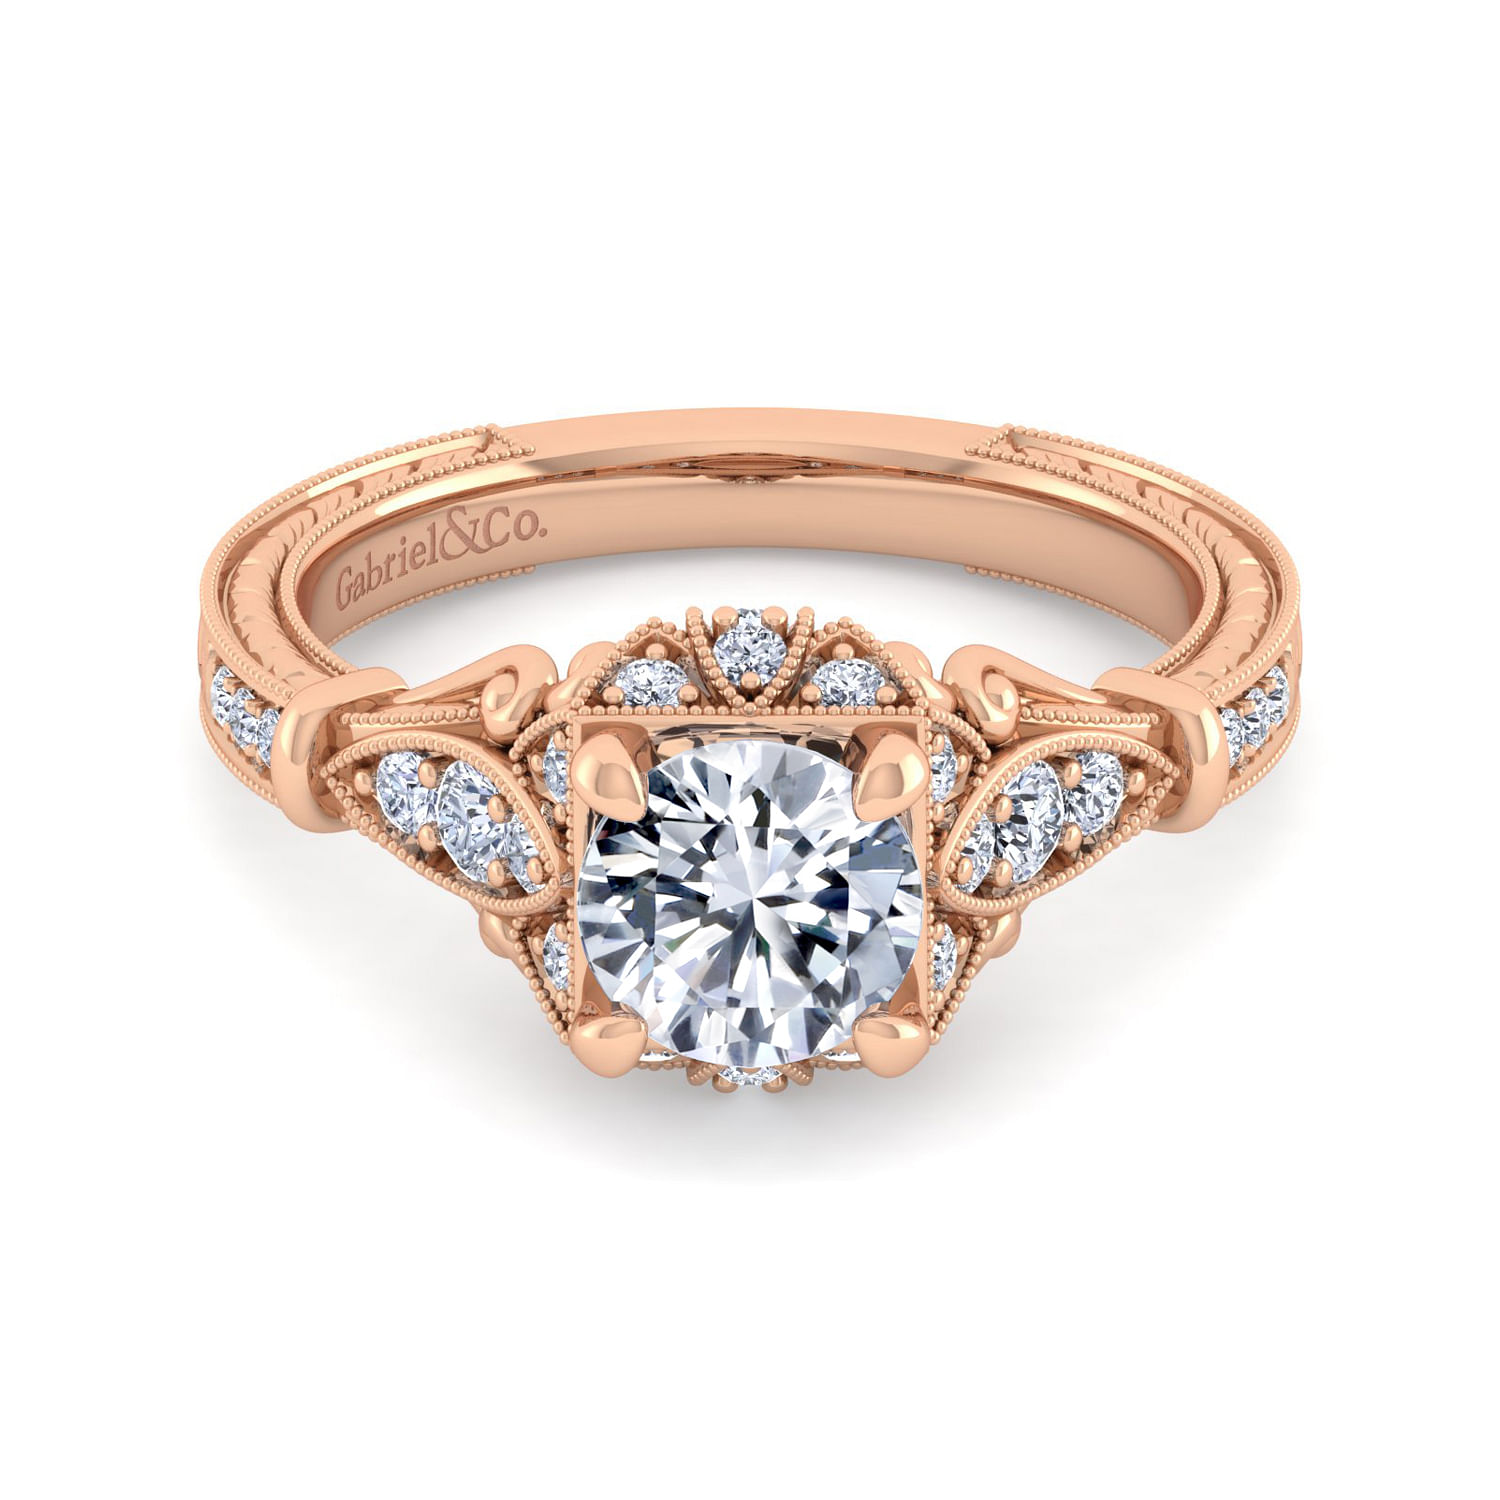 Montgomery - Unique 14K Rose Gold Vintage Inspired Halo Diamond Engagement Ring